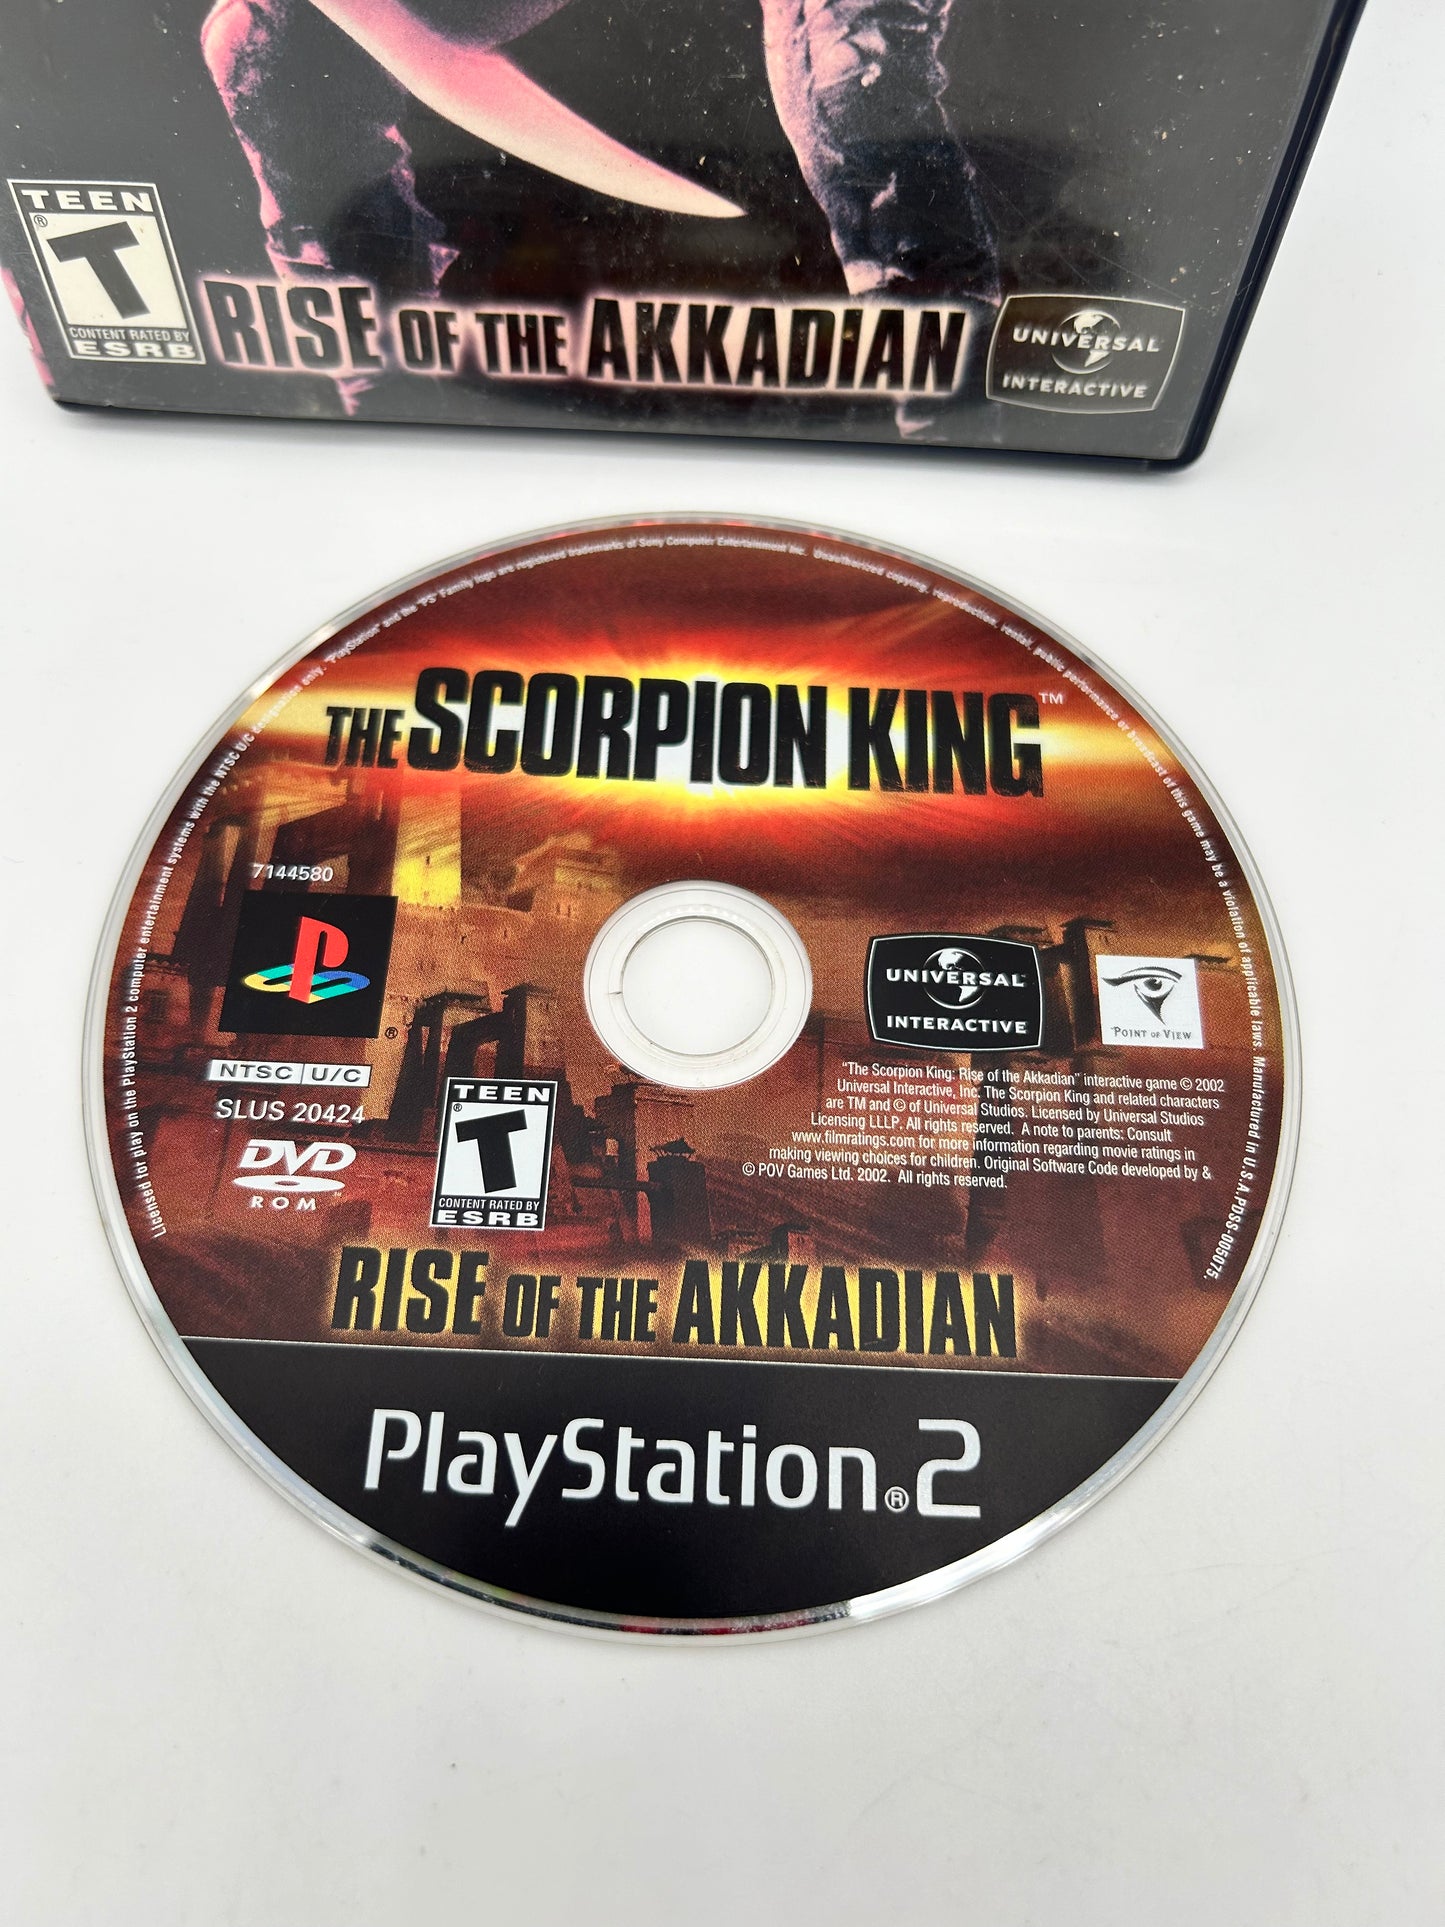 SONY PLAYSTATiON 2 [PS2] | THE SCORPiON KiNG RiSE OF THE AKKADiAN